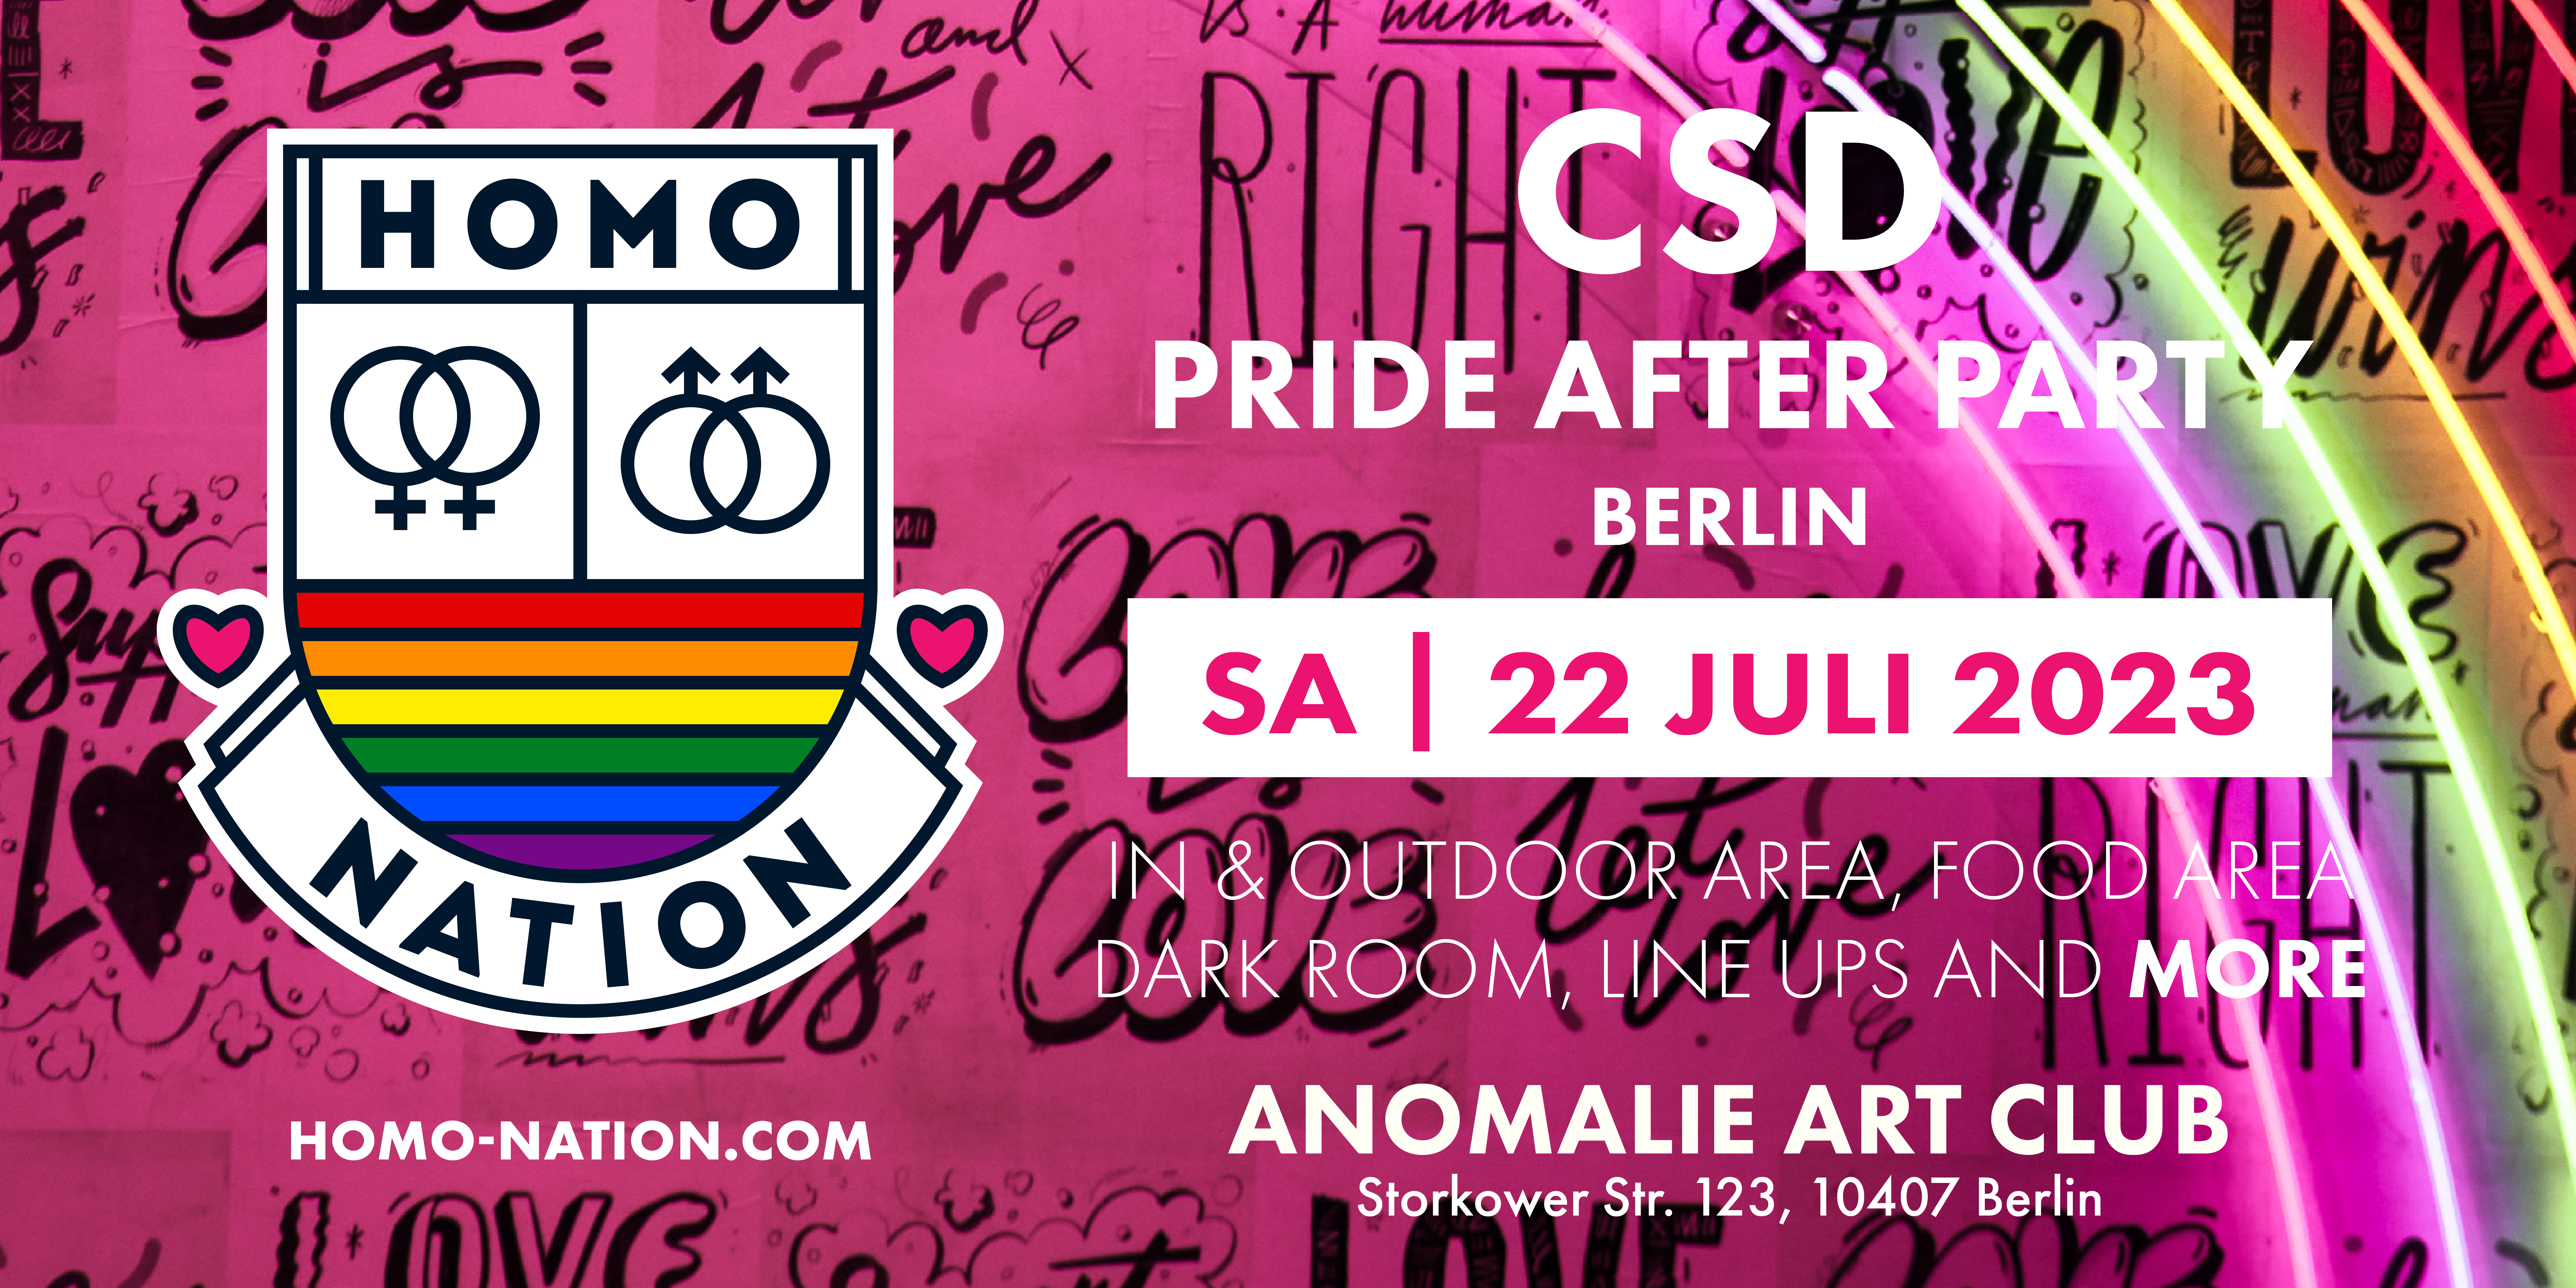 TONIGHT x Homo Nation - CSD After Party - In & Outdoor - Anomalie Art Club - フライヤー表